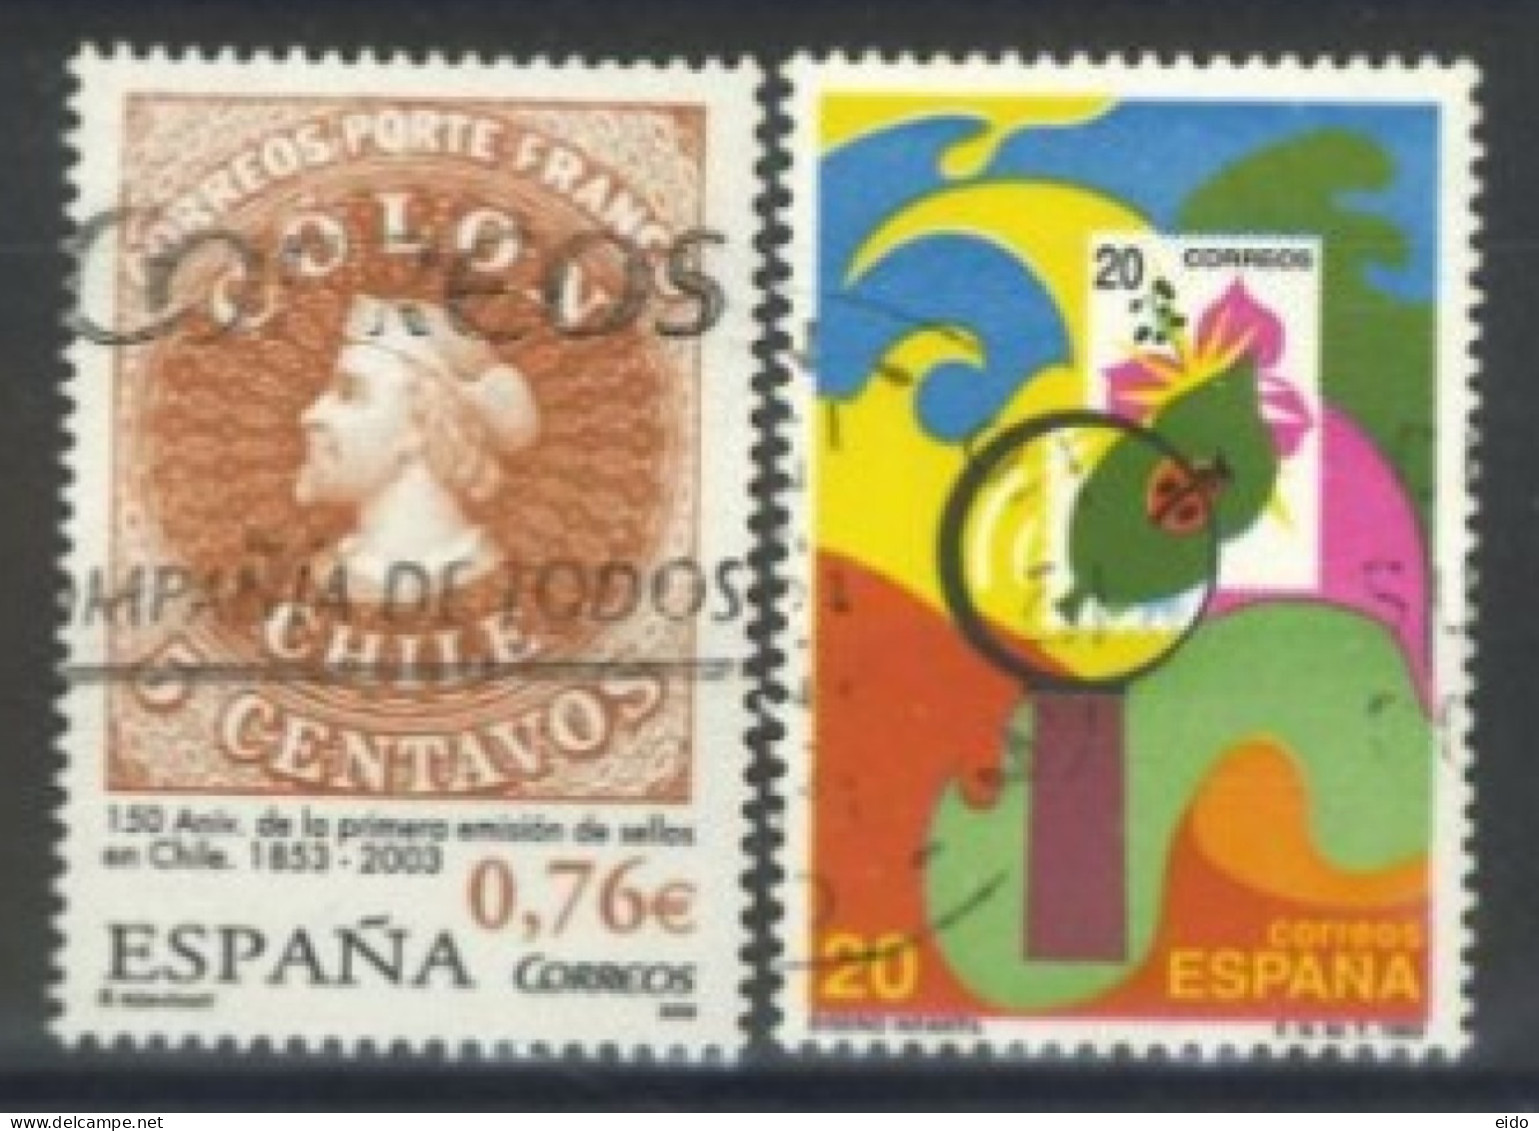 SPAIN,1989/2003, STAMP COLLECTING & CHILEAN POSTAGE STAMPS SET OF 2, # 2592, 3227, USED. - Used Stamps